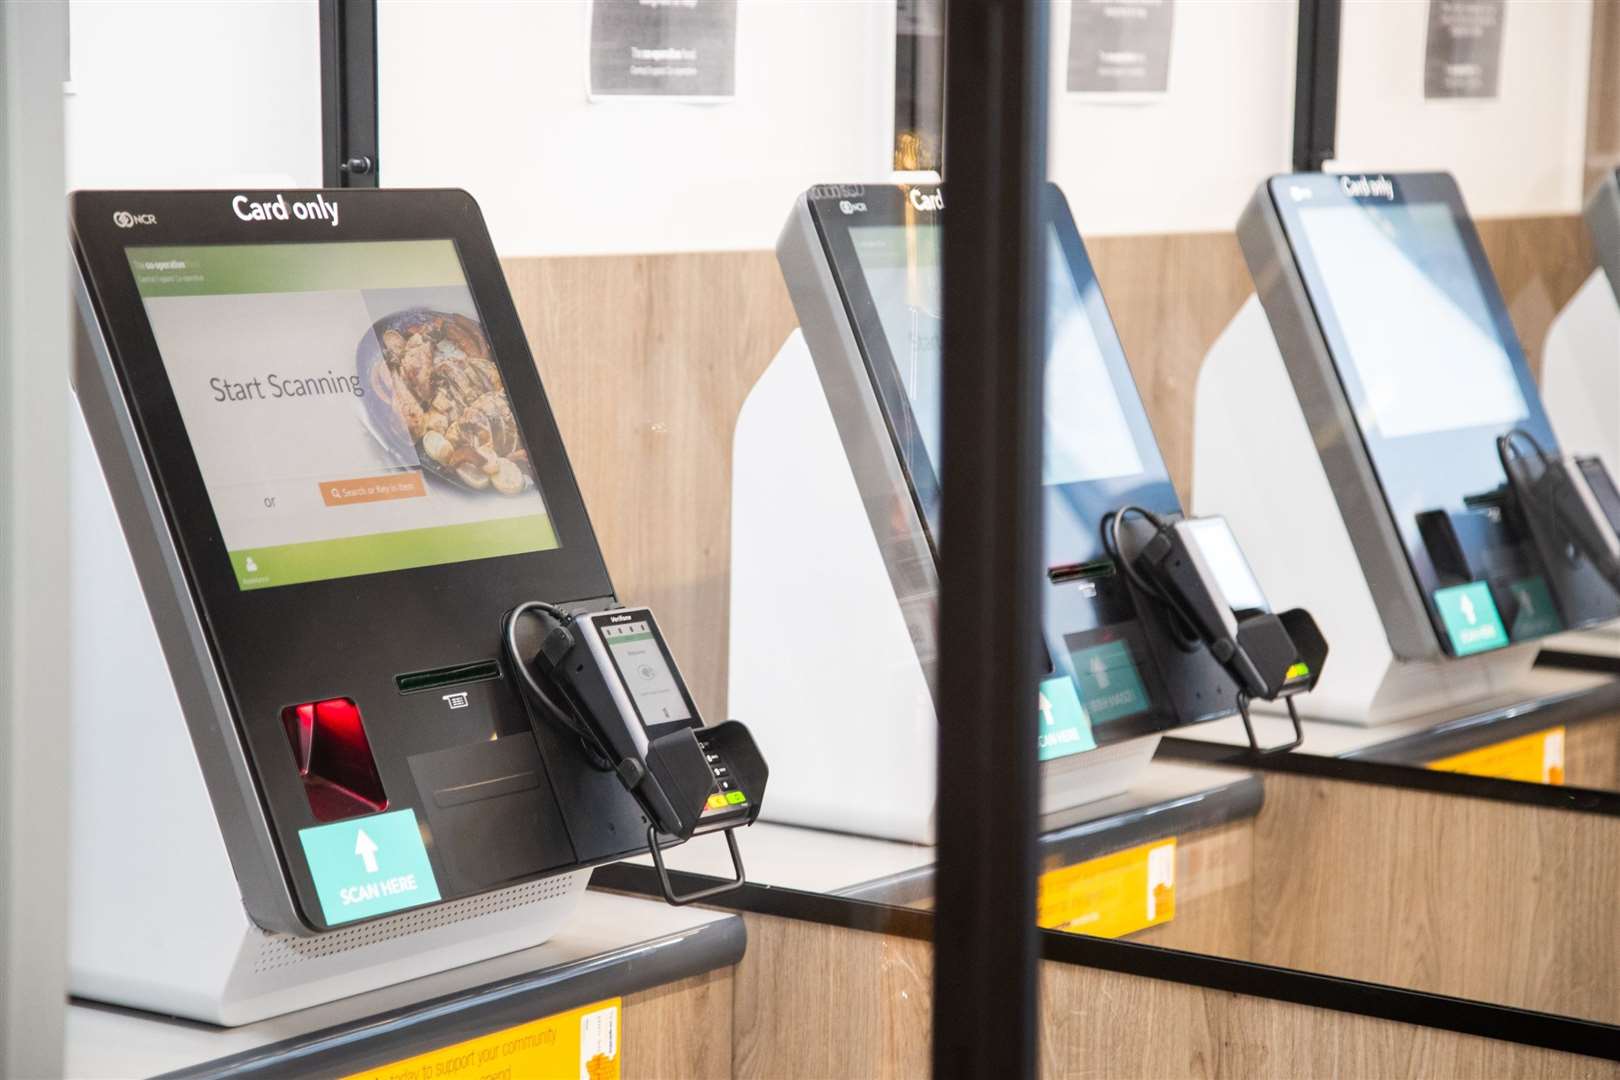 Self-scan checkouts are taking over